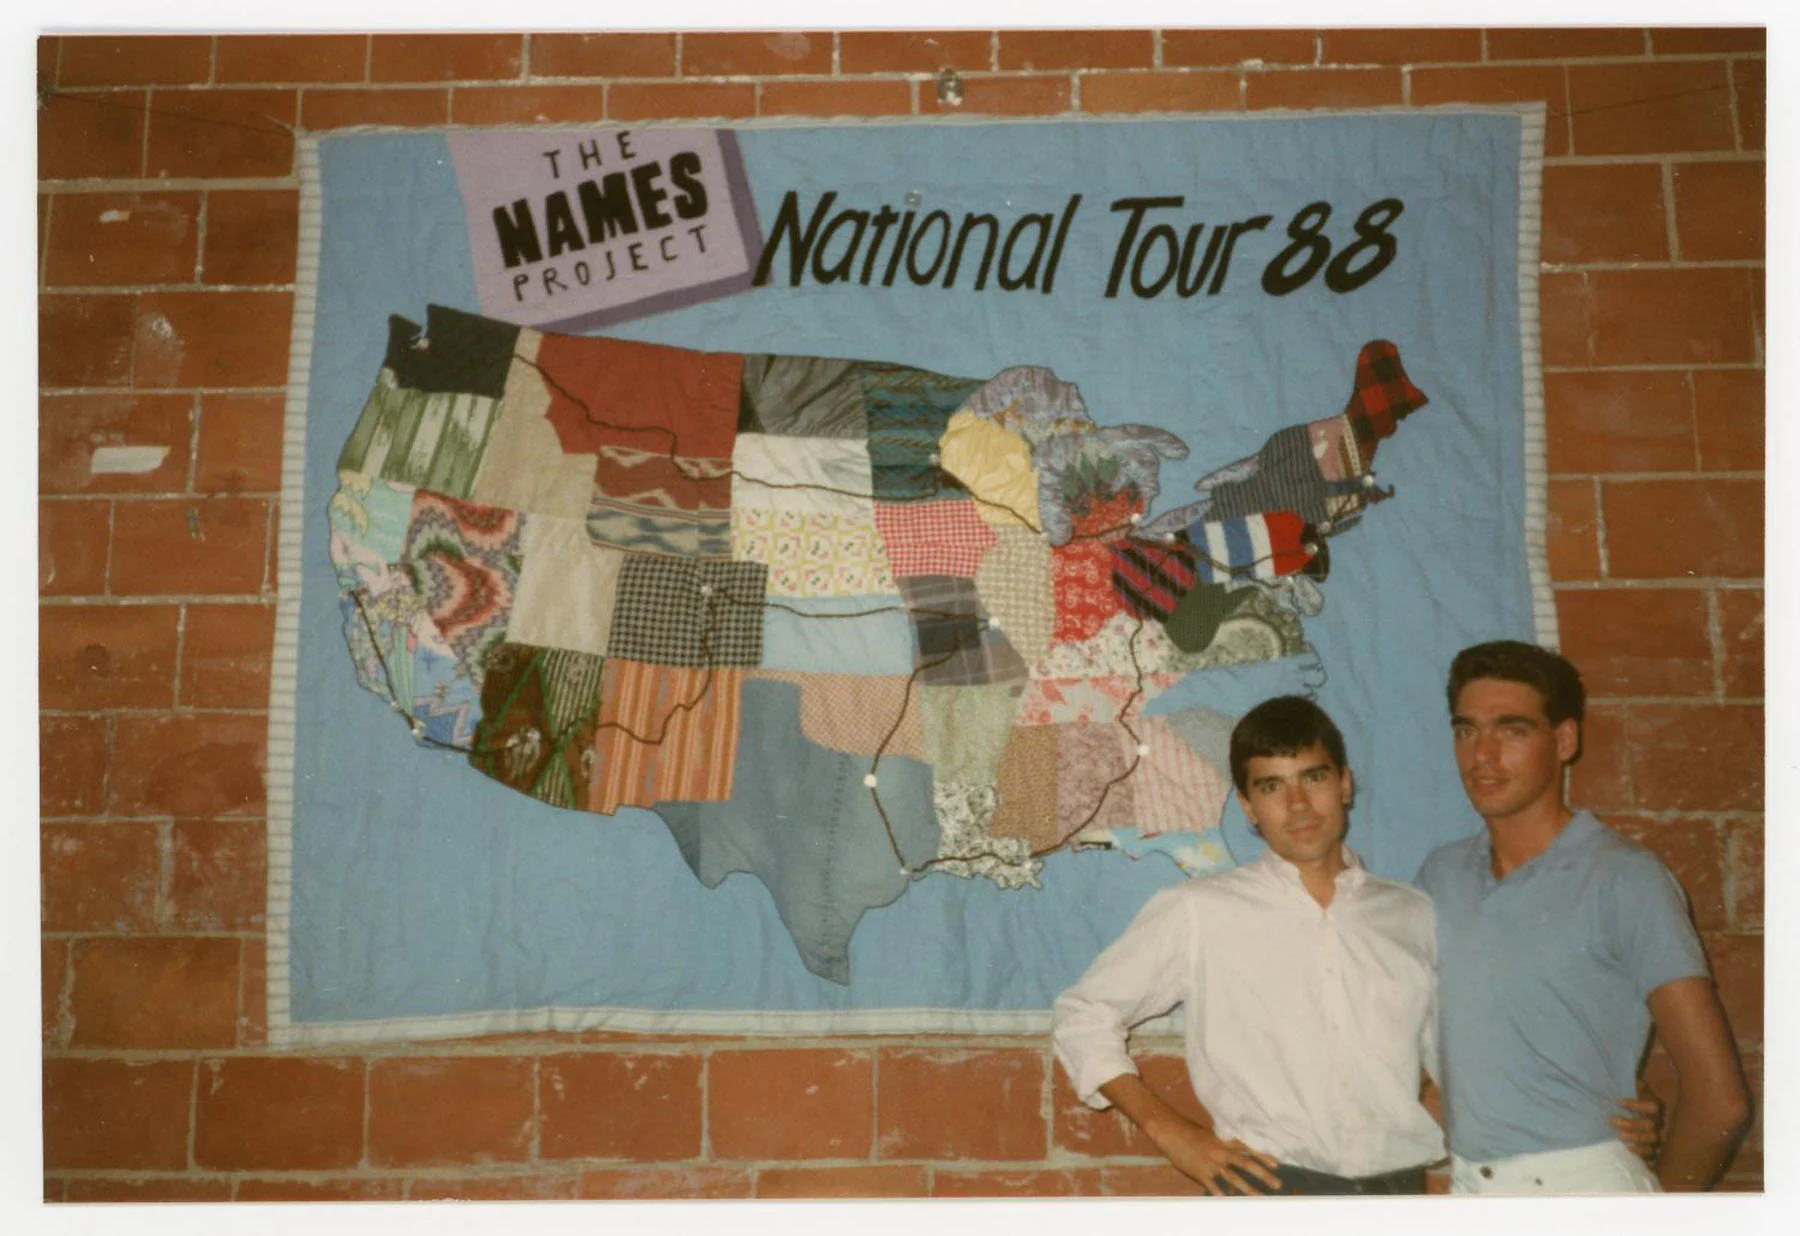 A color photograph of two men standing in front of a quilt panel that features a map of the United States with a map of stops on the Names project national tour in 1988. The text on the quilt reads, "The Names Project National Tour 88".